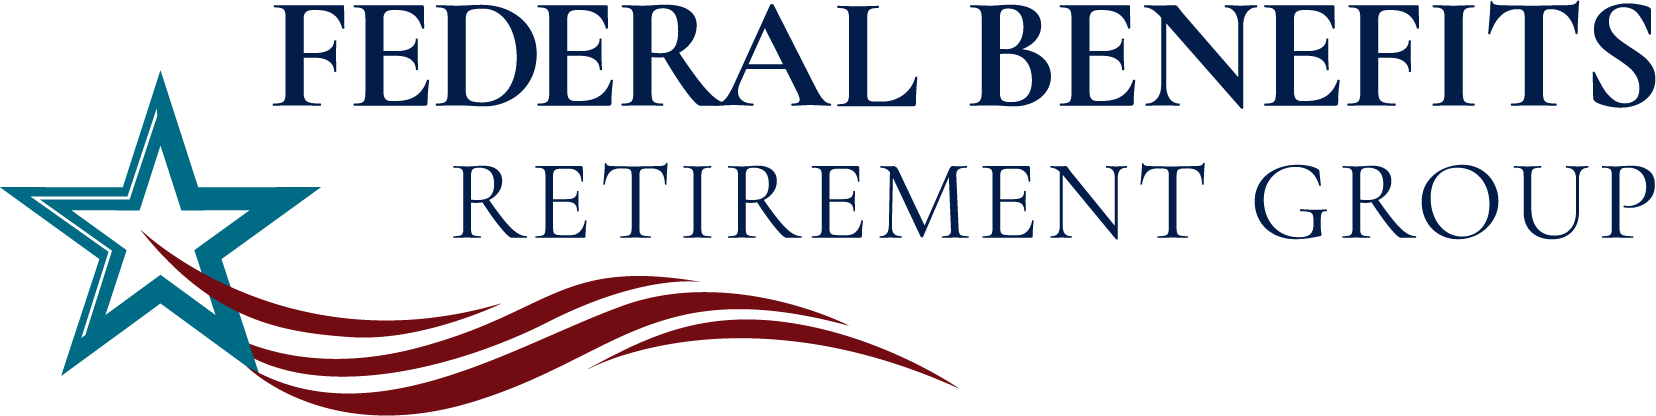 Federal Benefits Retirement Group 